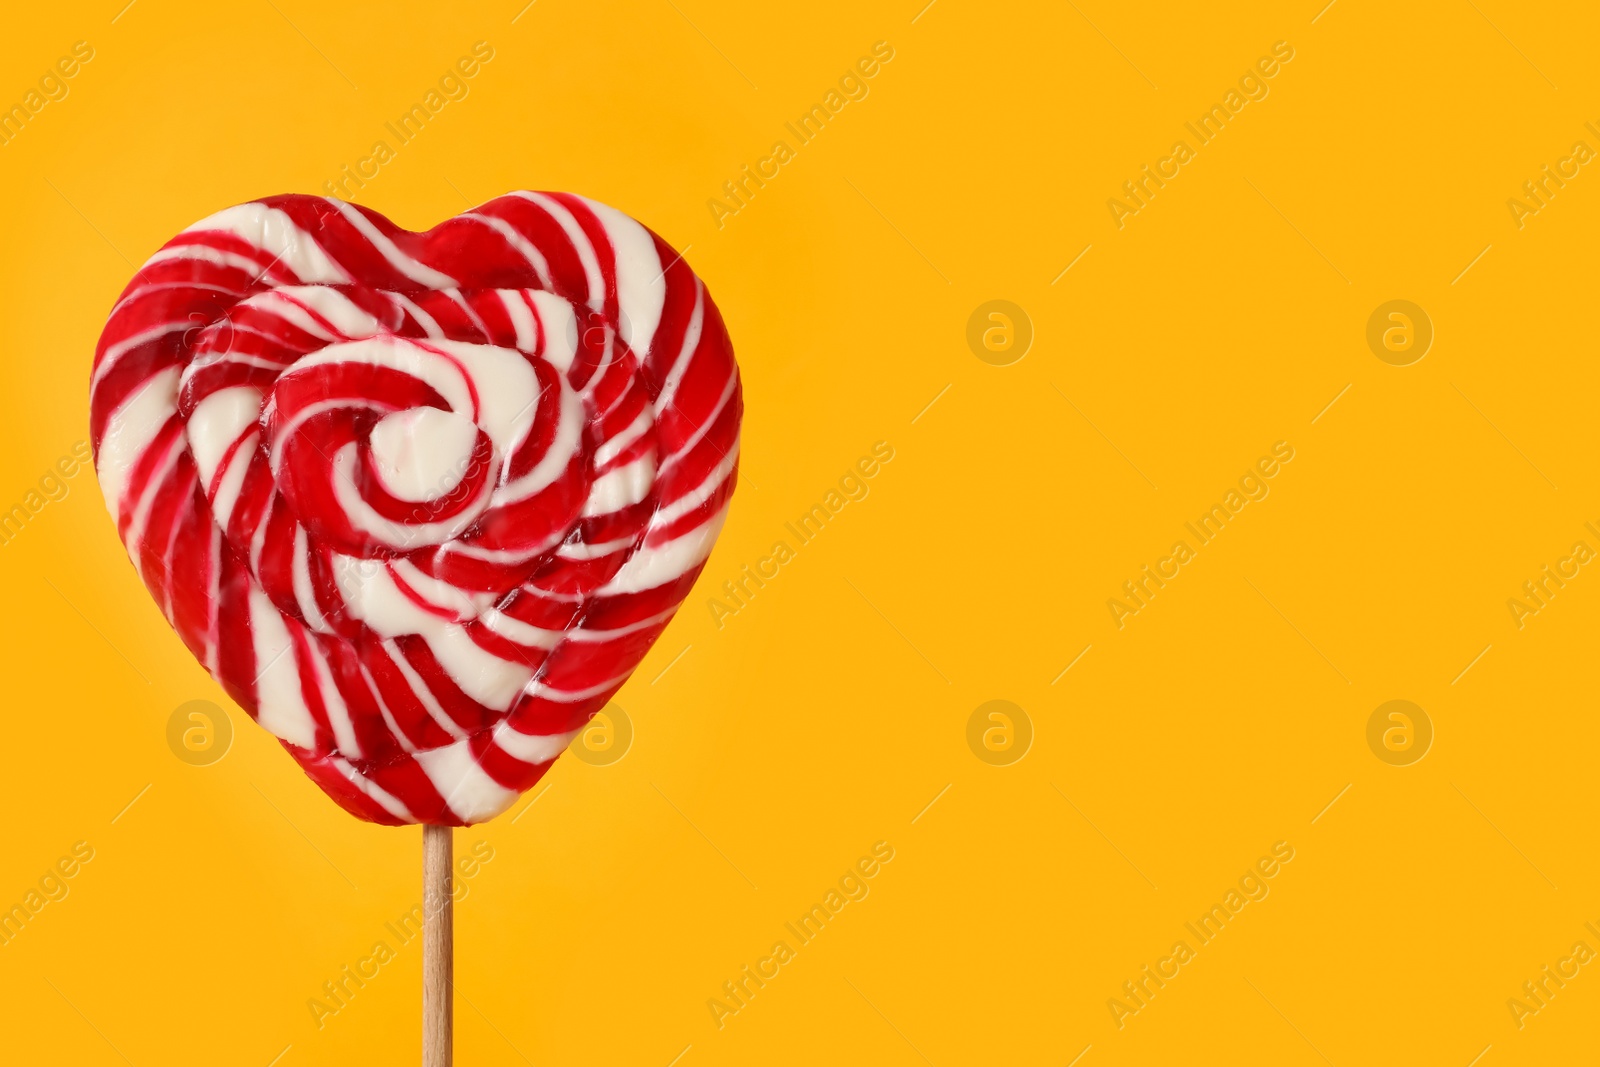 Photo of Sweet heart shaped lollipop on orange background, closeup view with space for text. Valentine's day celebration